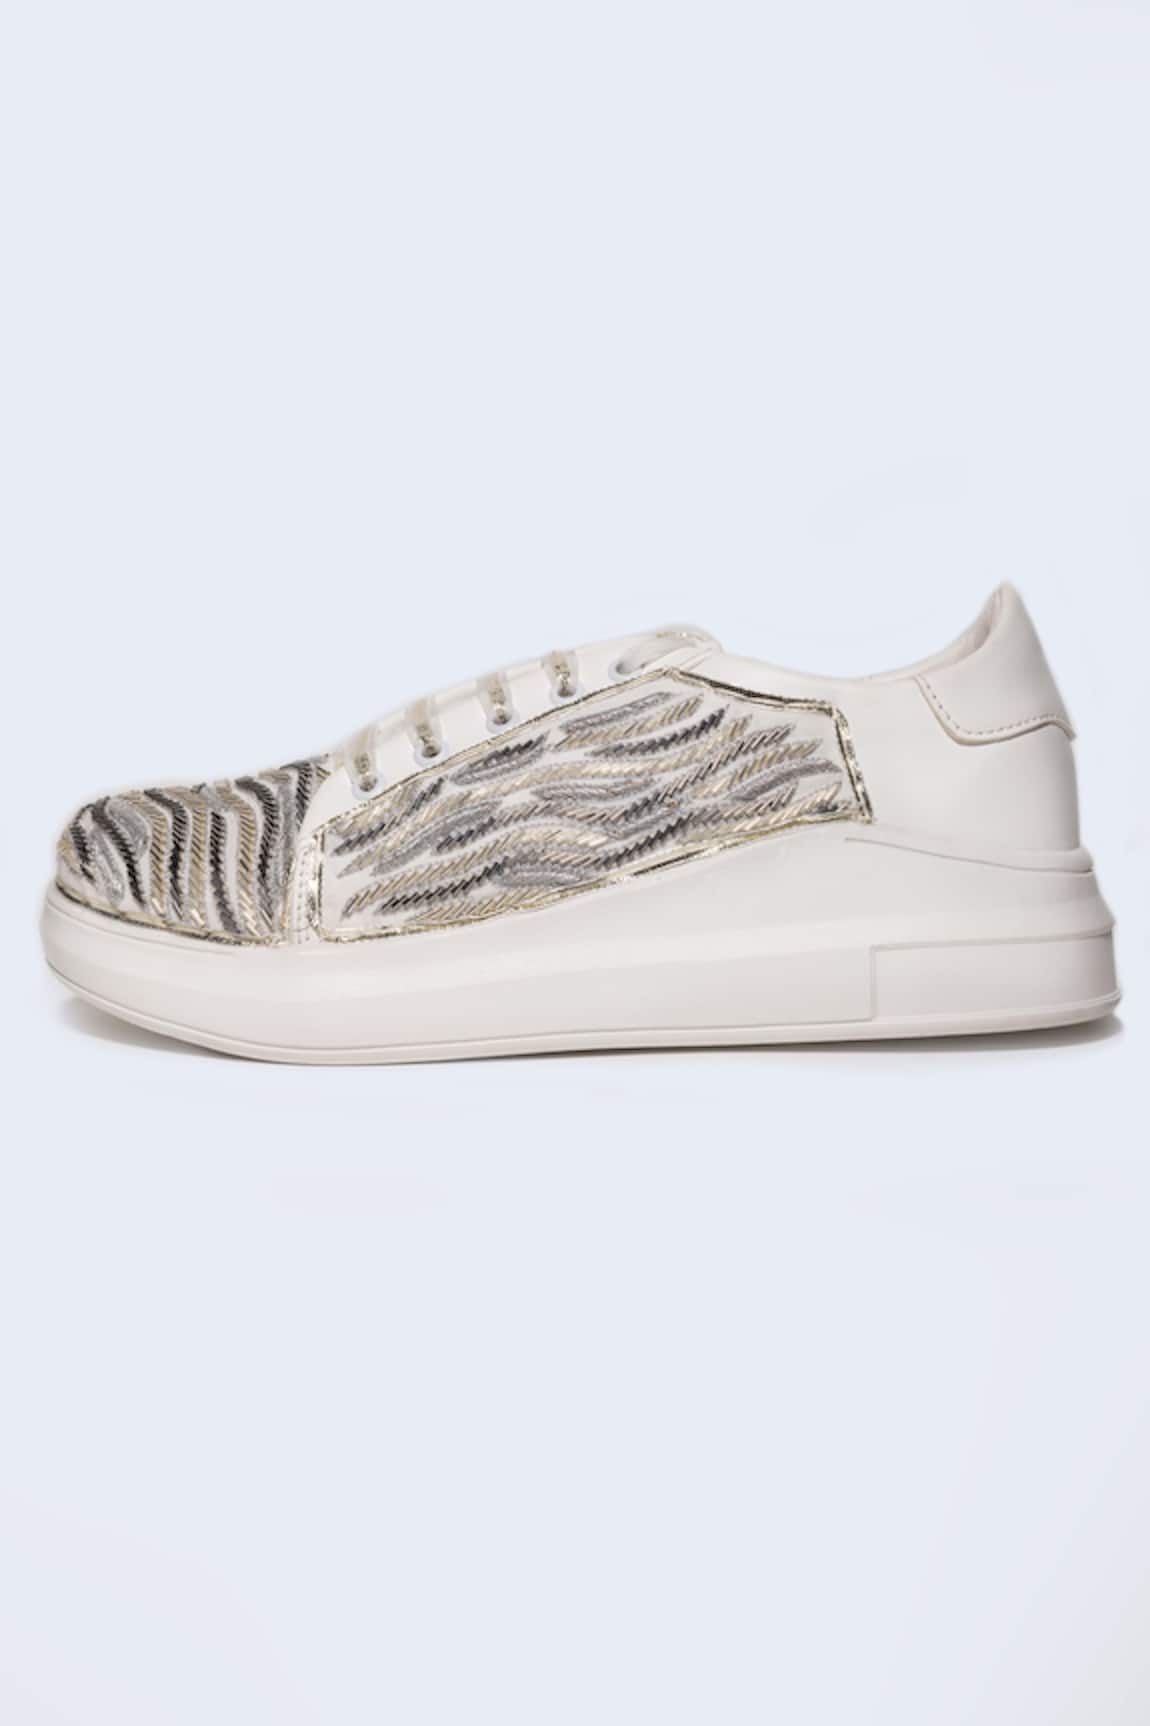 The Saree Sneakers Wave Cut Dana Embroidered Sneakers